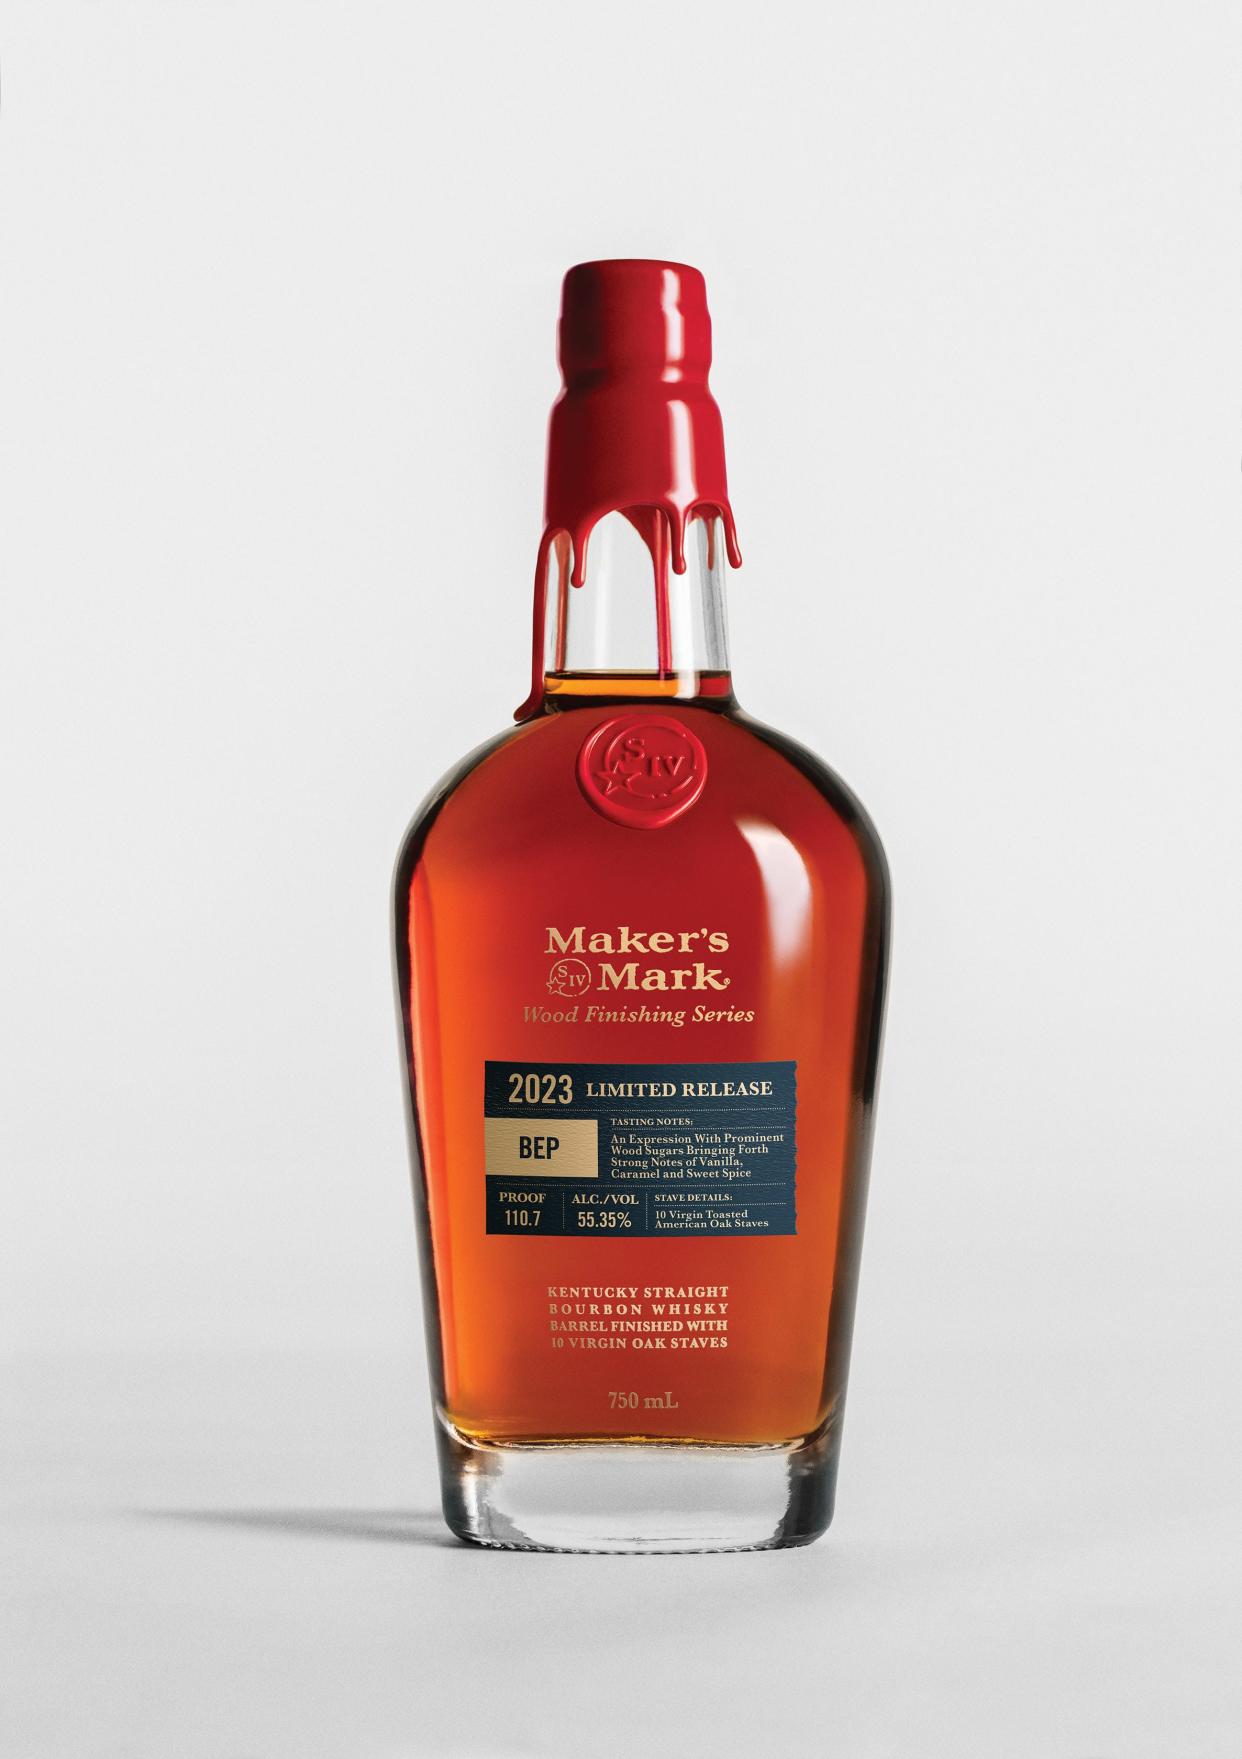 "BEP" is the seventh and final bourbon in the Maker’s Mark Wood Finishing Series, which over the past seven or so years has aimed to highlight different parts and traditions of the Loretto, Kentucky-based company.